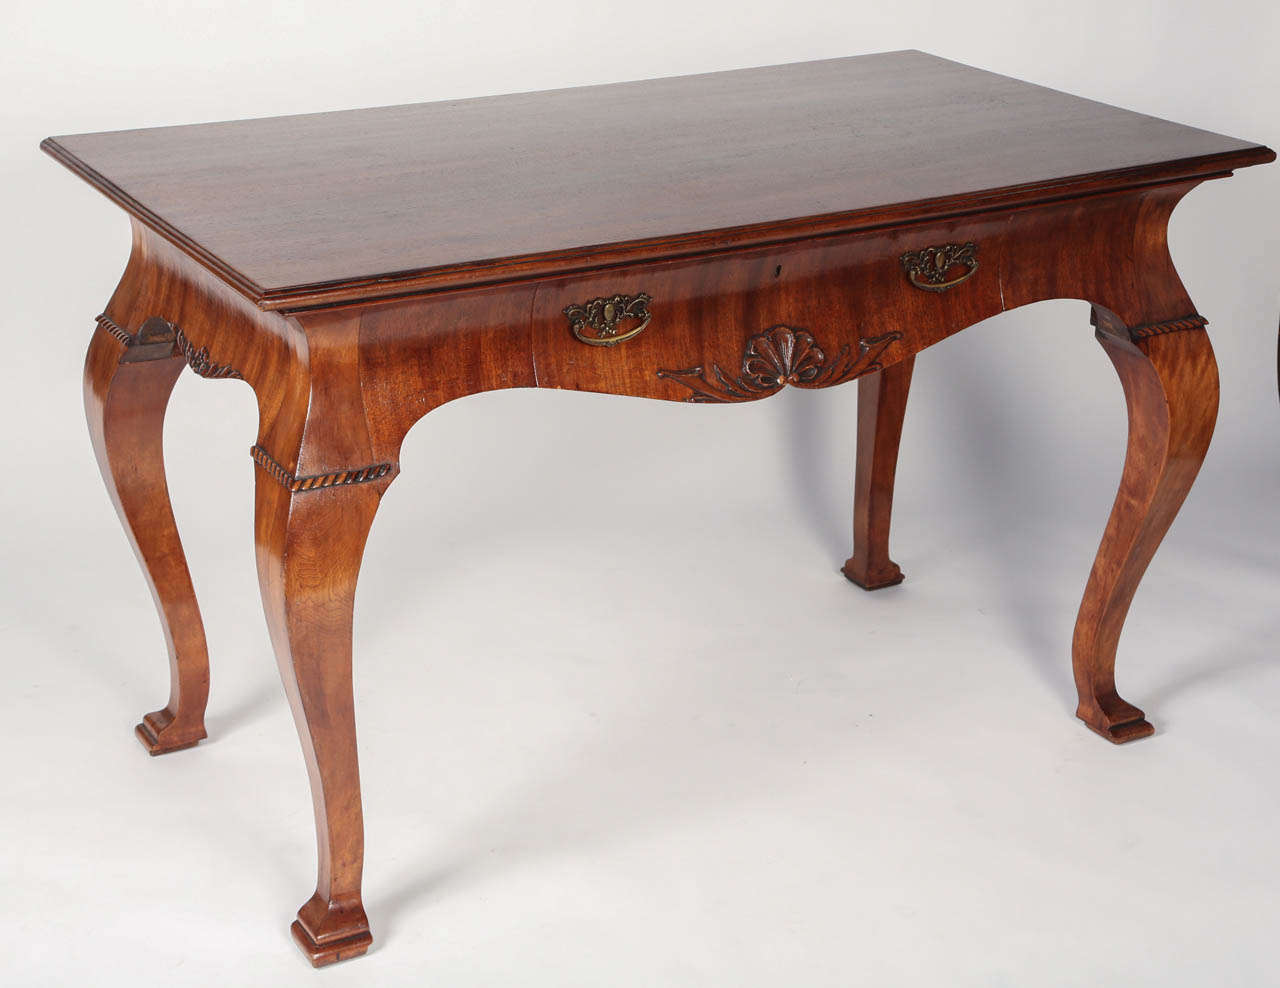 Beautiful mahogany desk in the George II style. The scalloped frieze is adorned with a shell motif and has one drawer. Cabriole legs terminate in square stepped feet.
This handsome desk would be the perfect piece in an office or a library.